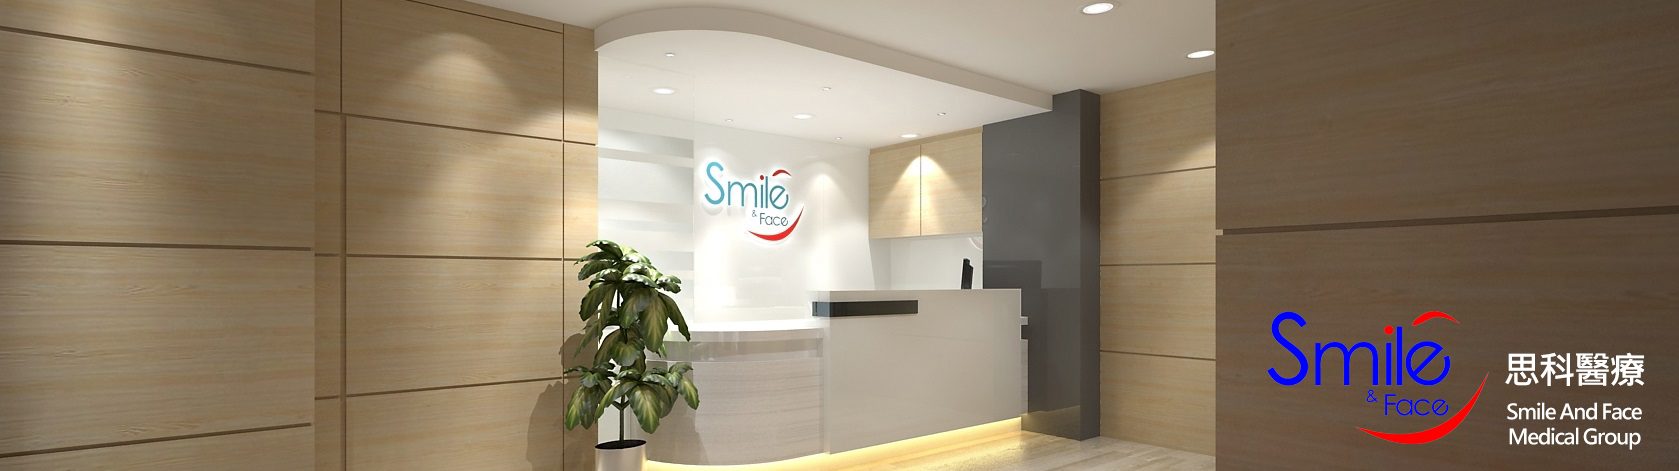 Smile & Face Medical Group